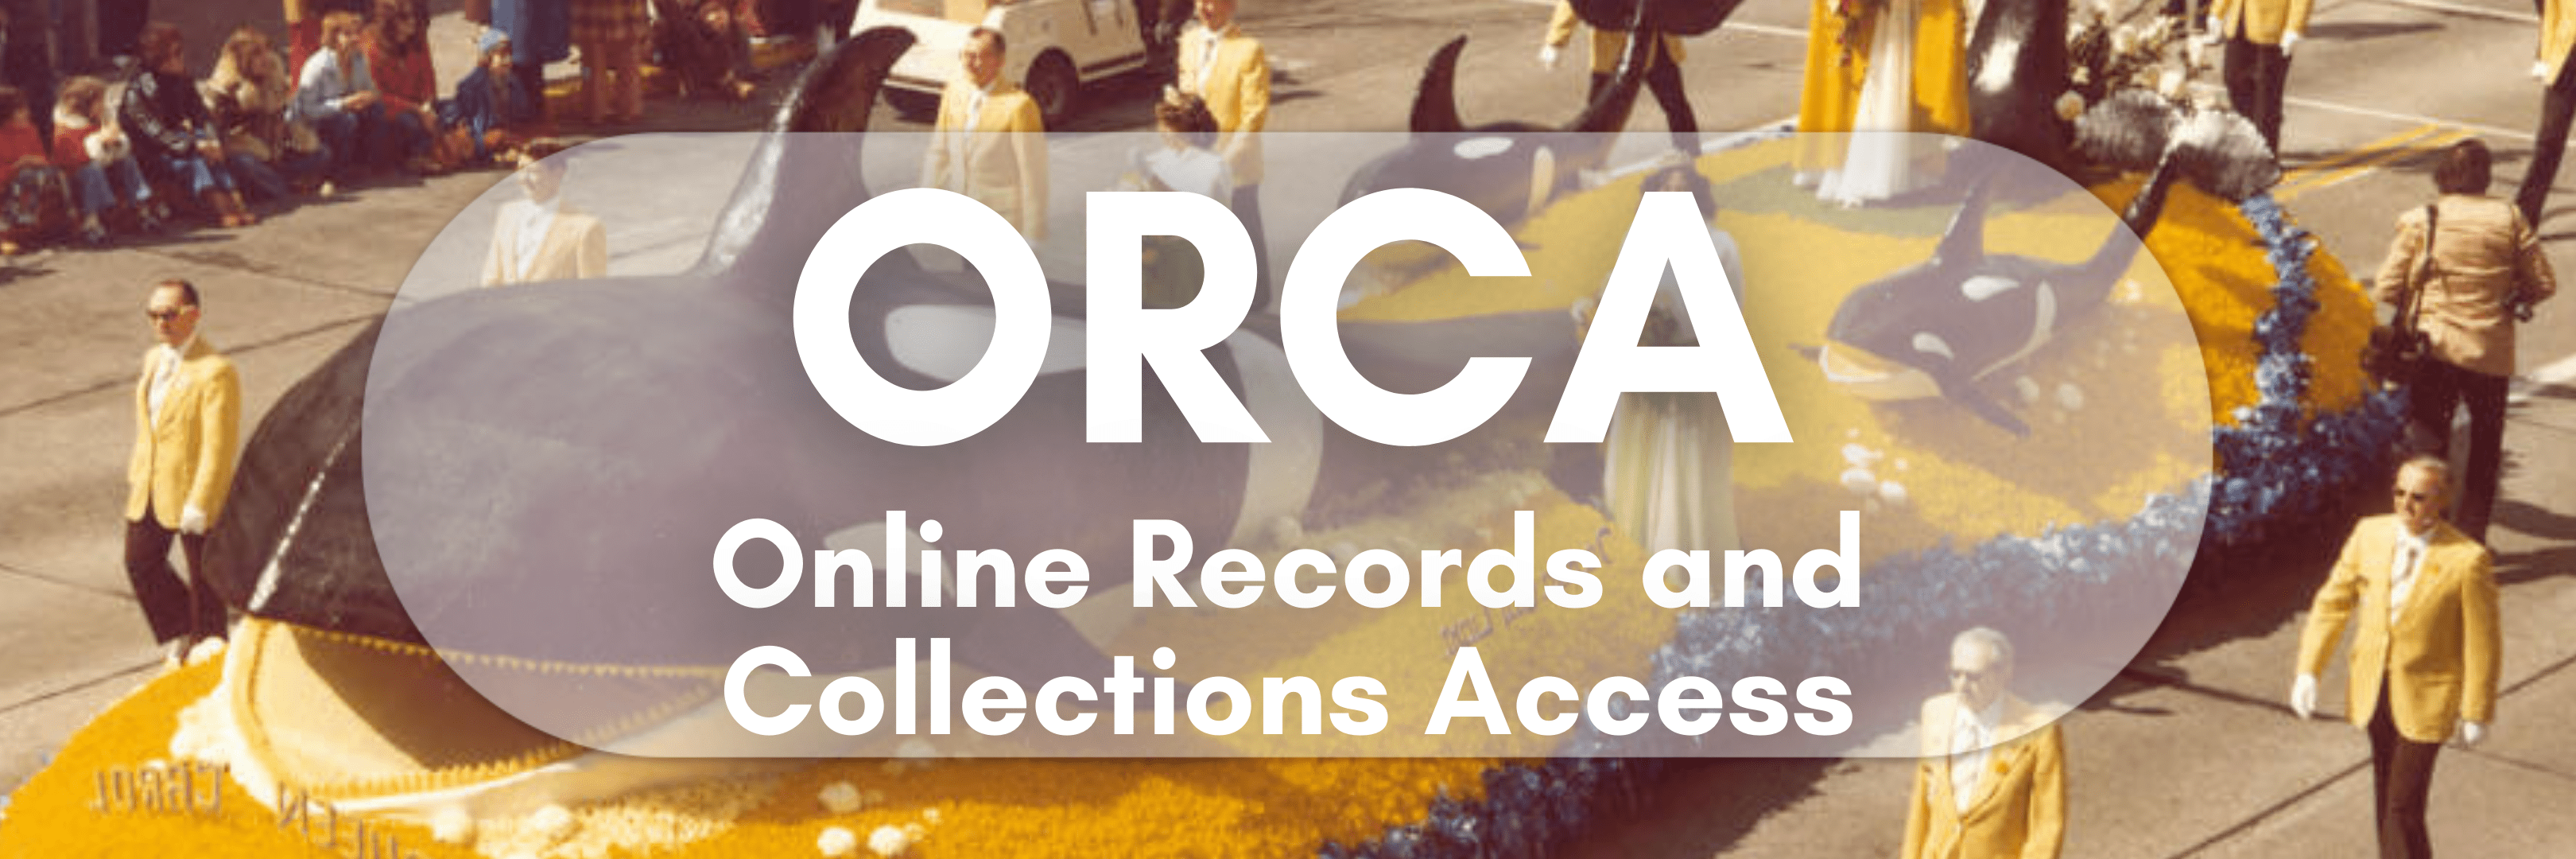 ORCA: Online Records and Collectons Access